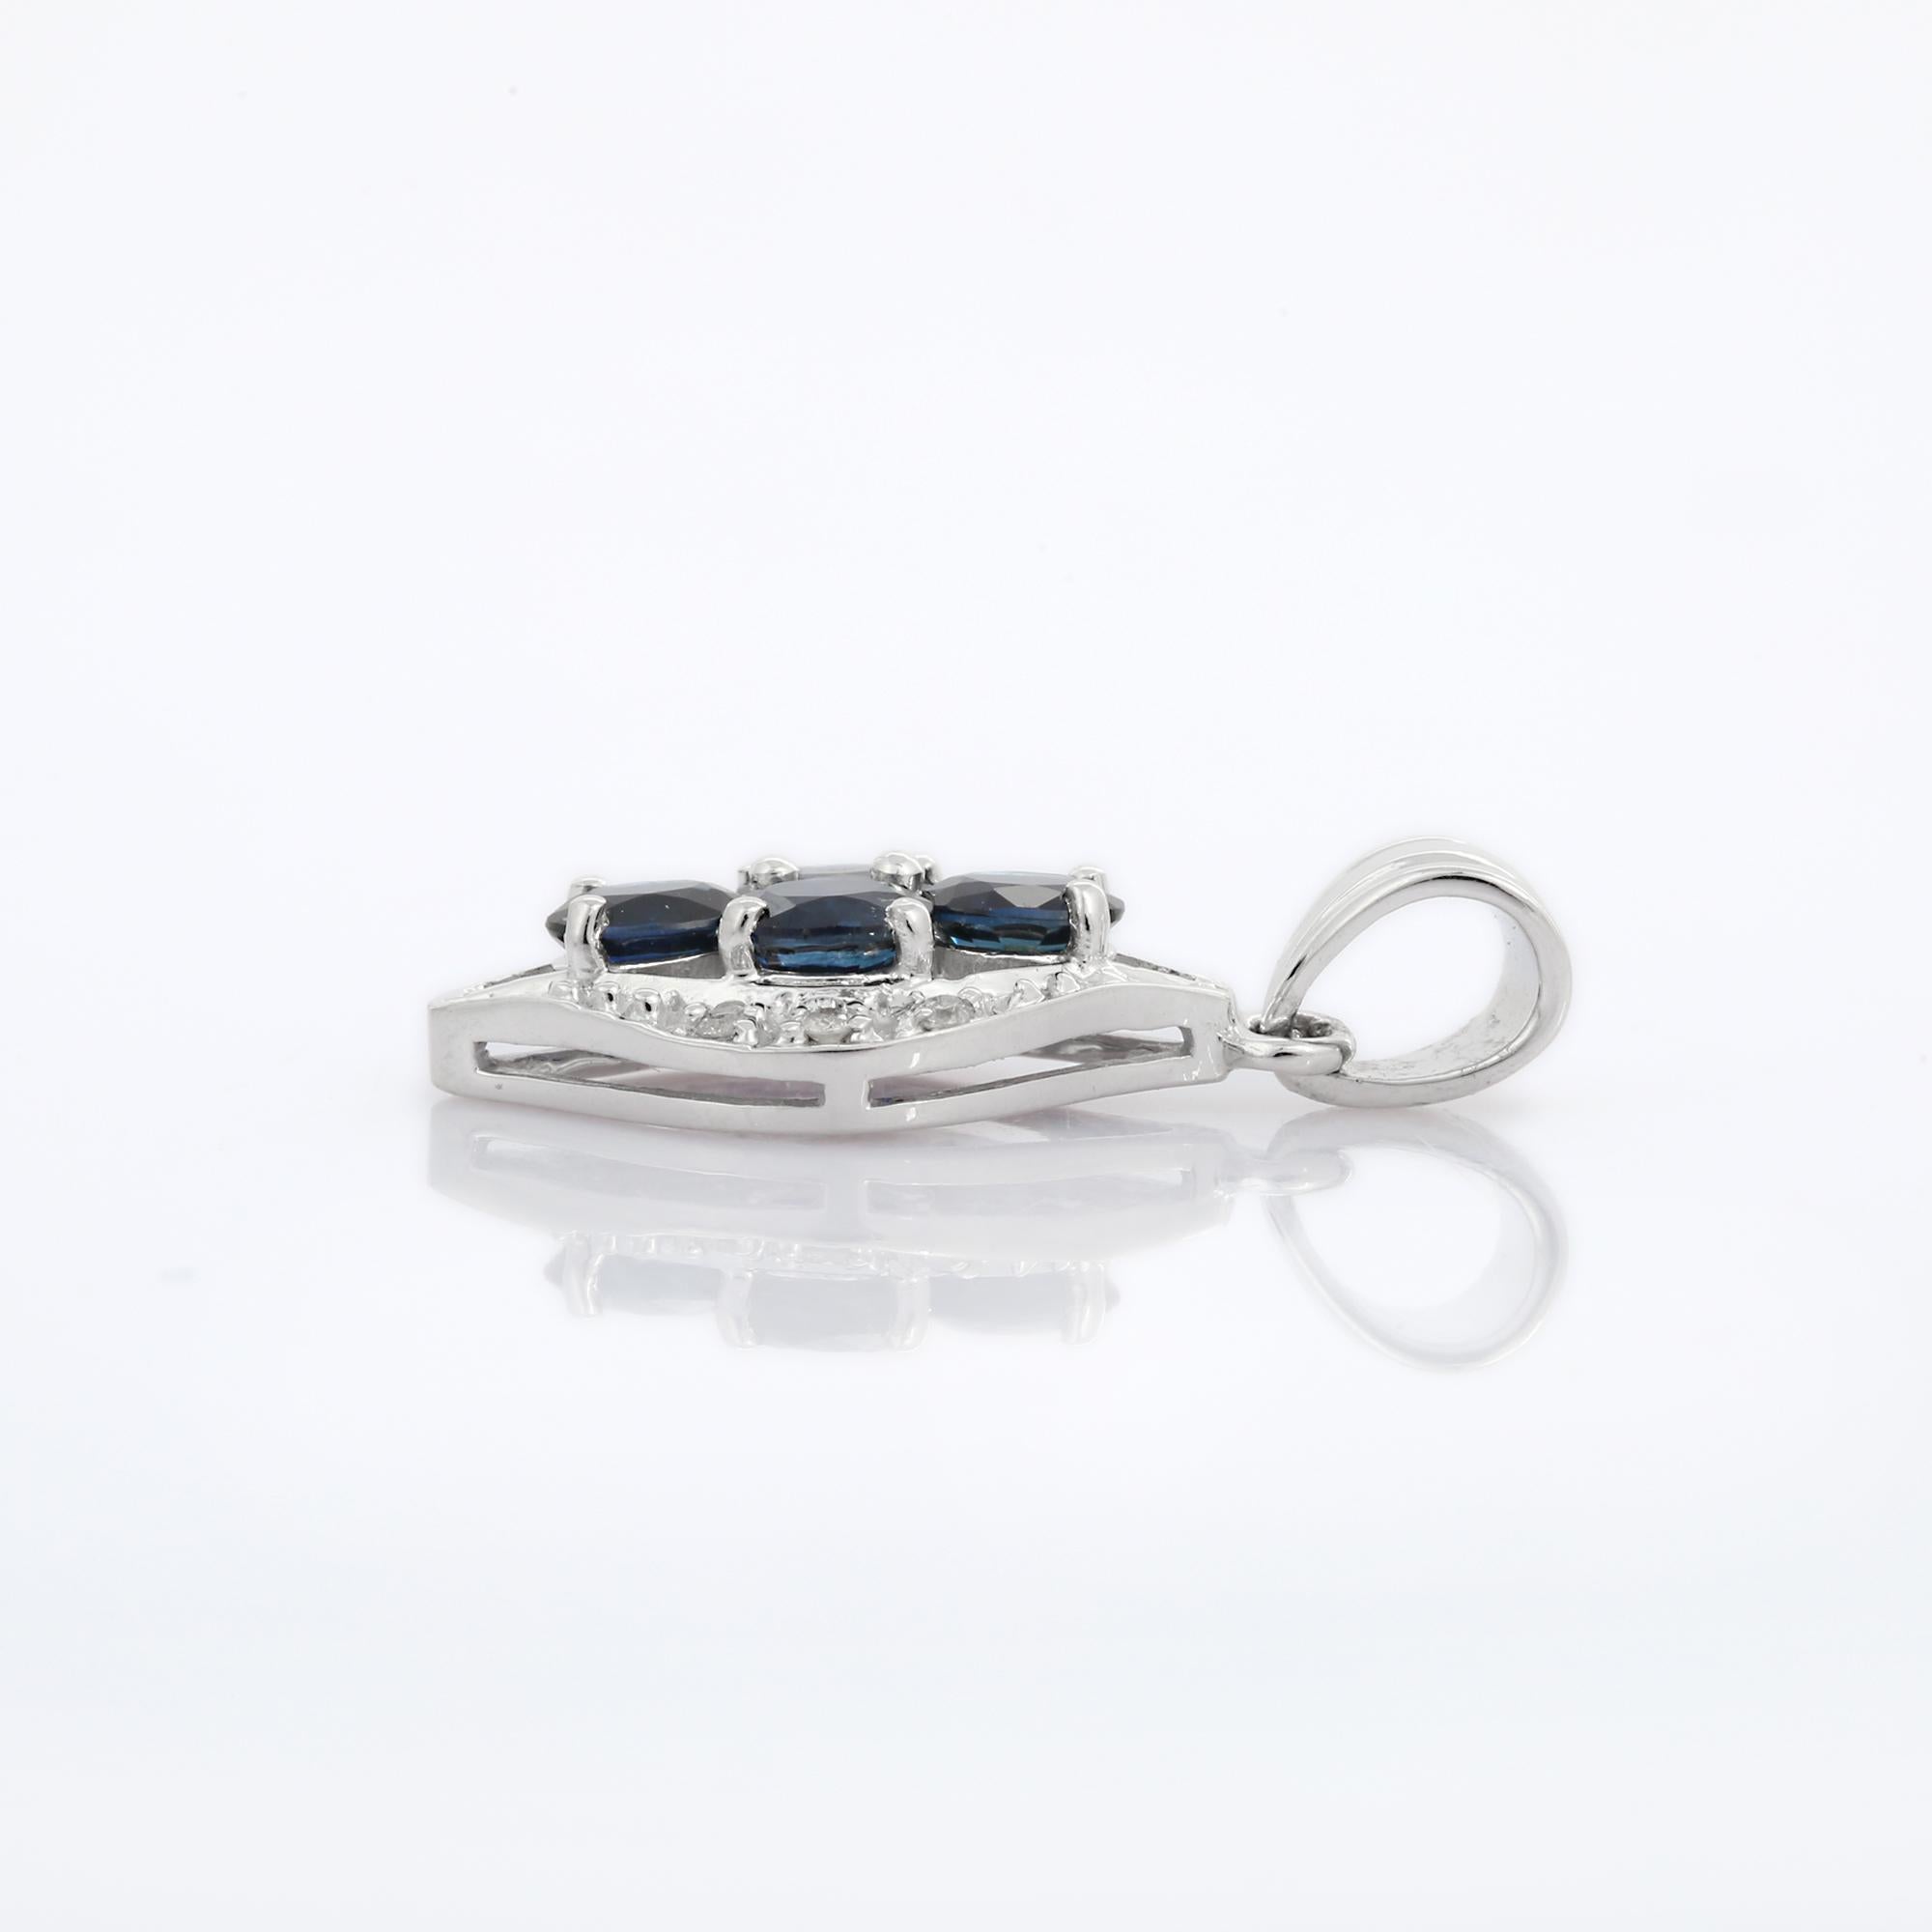 Natural Blue Sapphire pendant in 18K Gold. It has a oval cut sapphires studded with diamonds that completes your look with a decent touch. Pendants are used to wear or gifted to represent love and promises. It's an attractive jewelry piece that goes